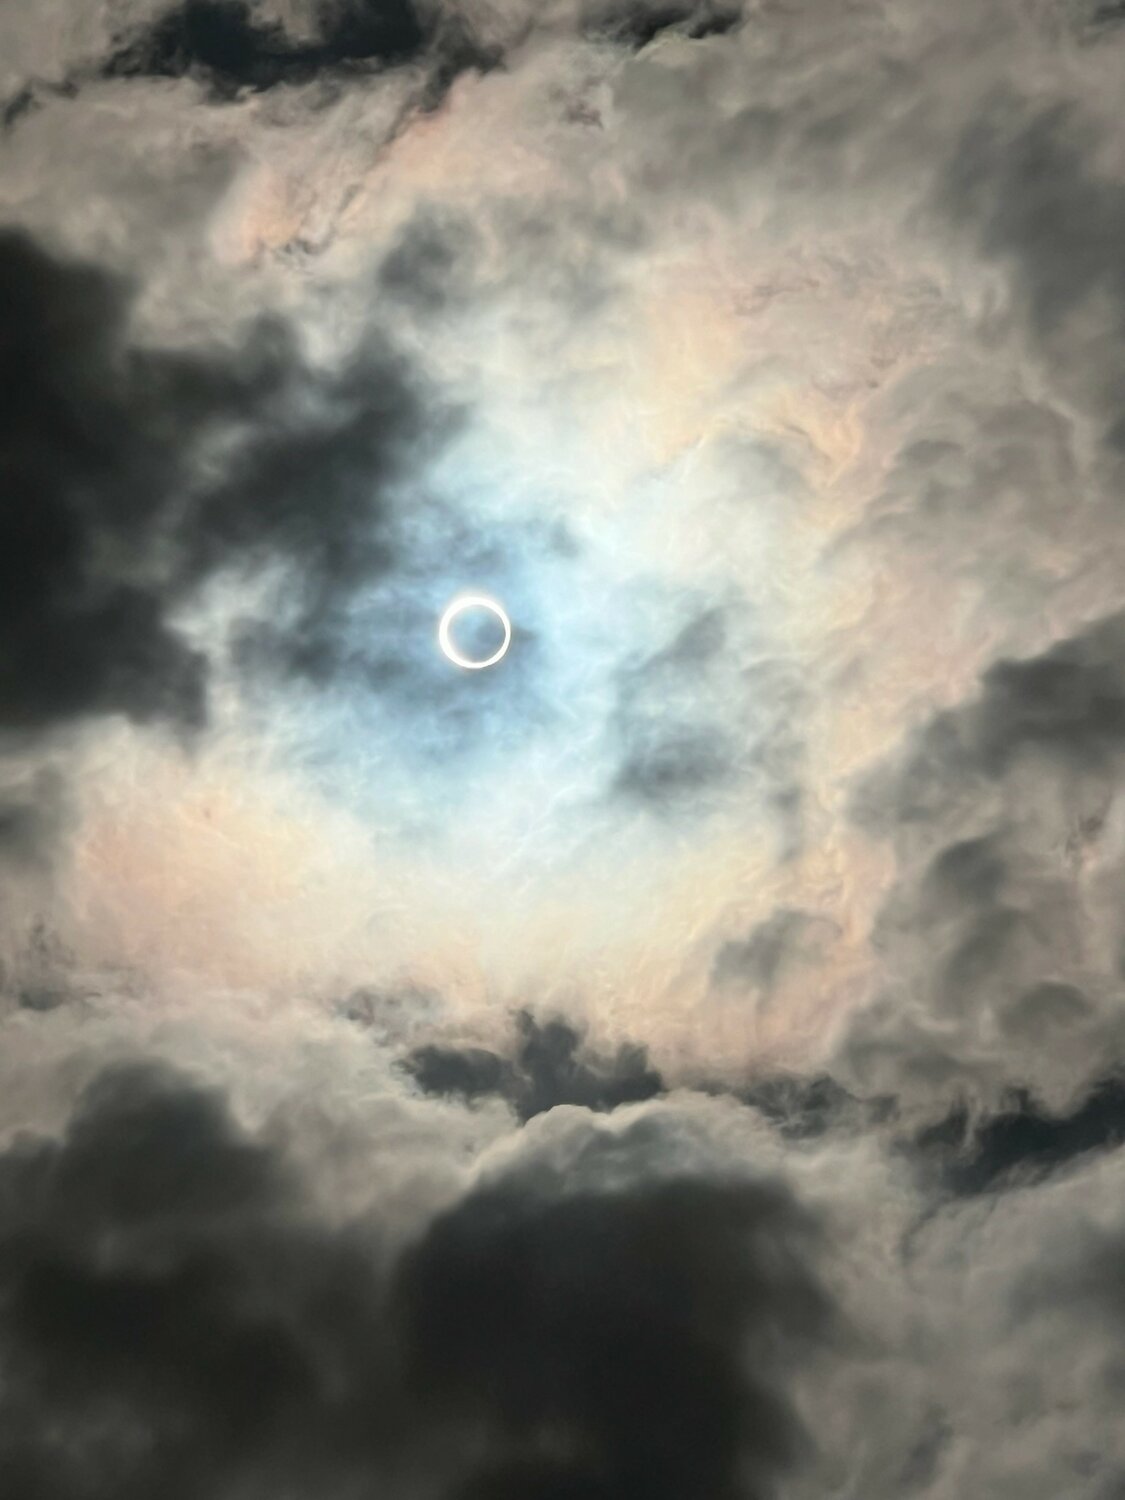 The annular eclipse as seen from San Antonio in October 2023. On Monday afternoon, the region will experience a near-total solar eclipse — 90% totality. The weather forecast calls for clear to partly cloudy skies Monday afternoon, which means that when the sun, moon and Earth align, it is likely to be visible.